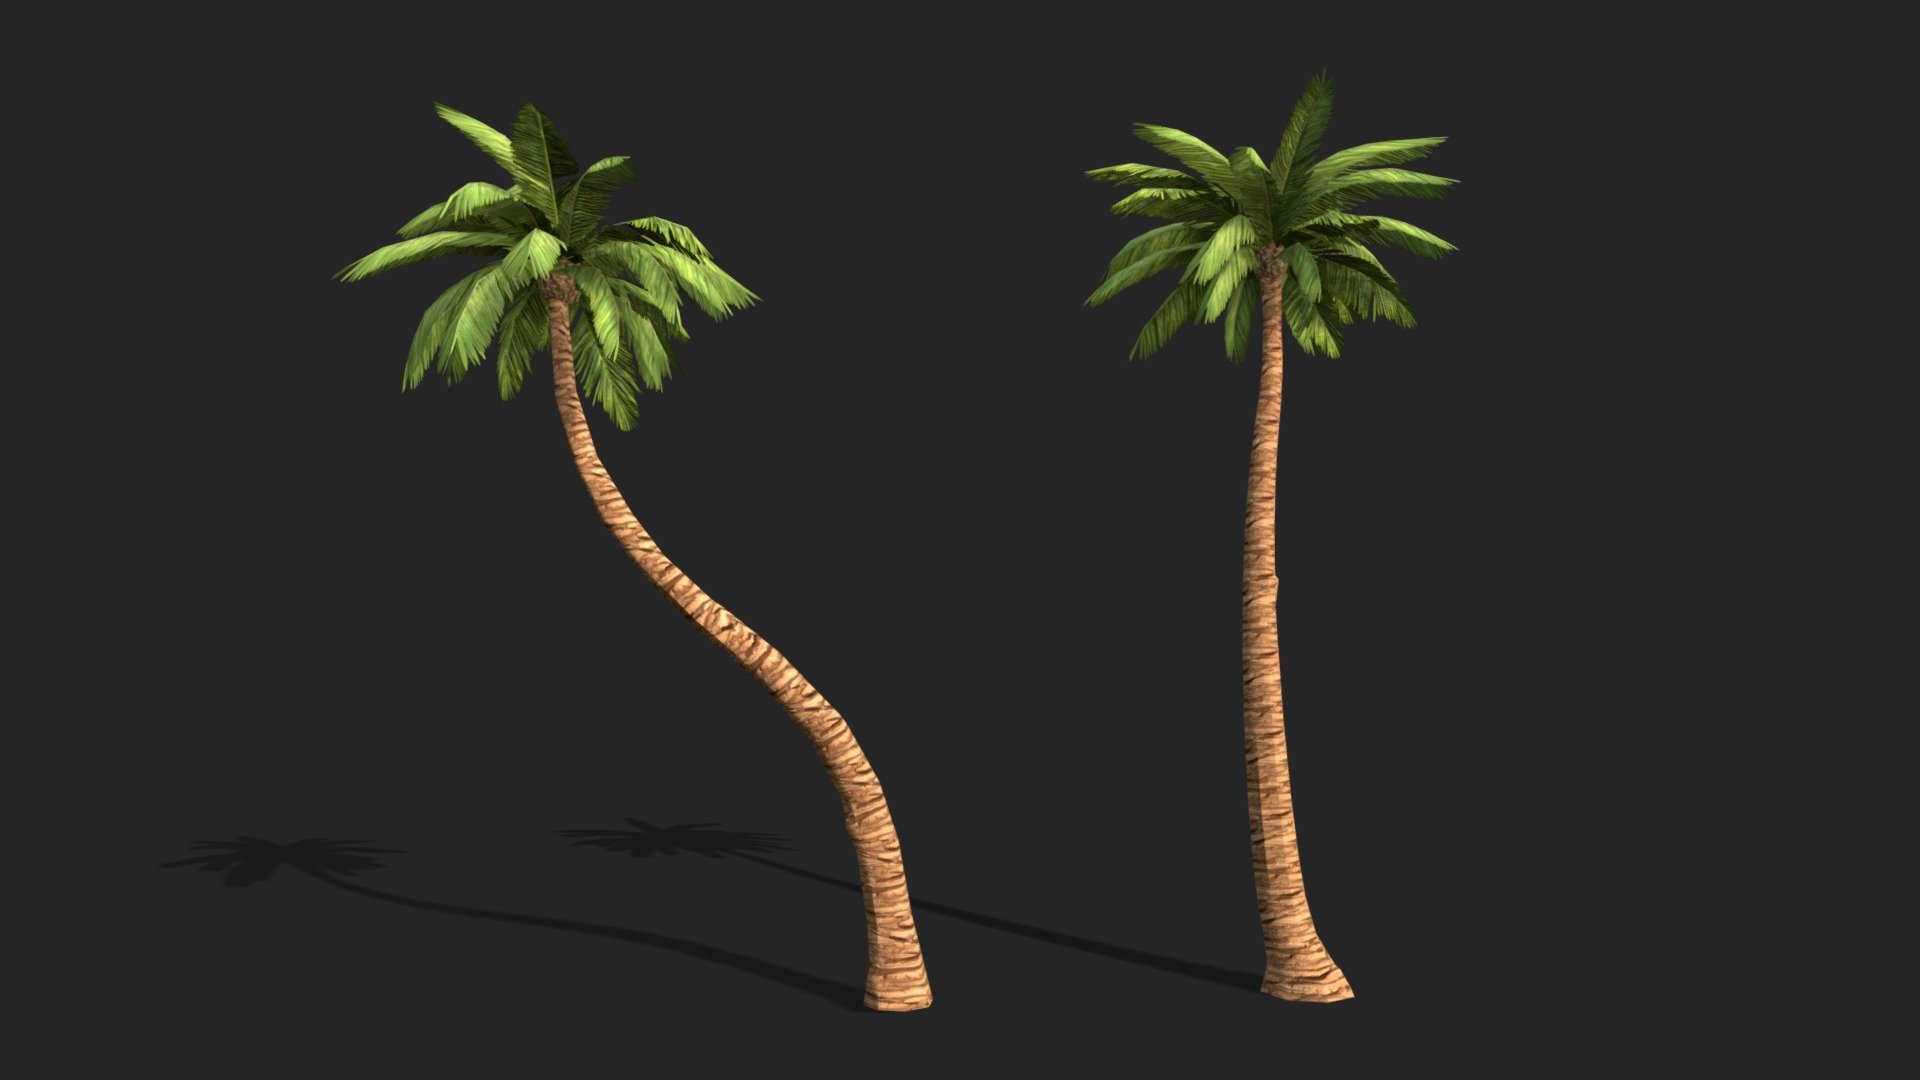 Elevate your game projects or rendering scenes with our high-quality 3D Palm Tree models. Designed with attention to detail, these models are perfect for creating stunningly realistic environments. With optimized performance and seamless integration, our Palm Tree models are a must-have for any game or rendering project. Invest in them today and take your work to new heights!

Technical Details:

Straight Palm LOD 1:

- Polygons: 1018

- Vertices:1104

- Mesh: 2

Straight Palm LOD 2:

- Polygons: 316

- Vertices: 882

- Mesh: 2

Straight Palm LOD 3:

- Polygons: 268

- Vertices: 678

- Mesh: 2

Curved Palm LOD 1:

- Polygons: 940

- Vertices: 1039

- Mesh: 2

Curved Palm LOD 2:

- Polygons: 322

- Vertices: 830

-Mesh: 2

Curved Palm LOD 3:

- Polygons: 227

- Vertices: 555

- Mesh: 2

Textures:

UV mapping: Yes, overlapping
Types of materials and texture maps: Leaf Diffuse and Bump texture. Trunk Diffuse and Bump texture.
Textures have PNG extension, 512 x 512 resolution 3d model